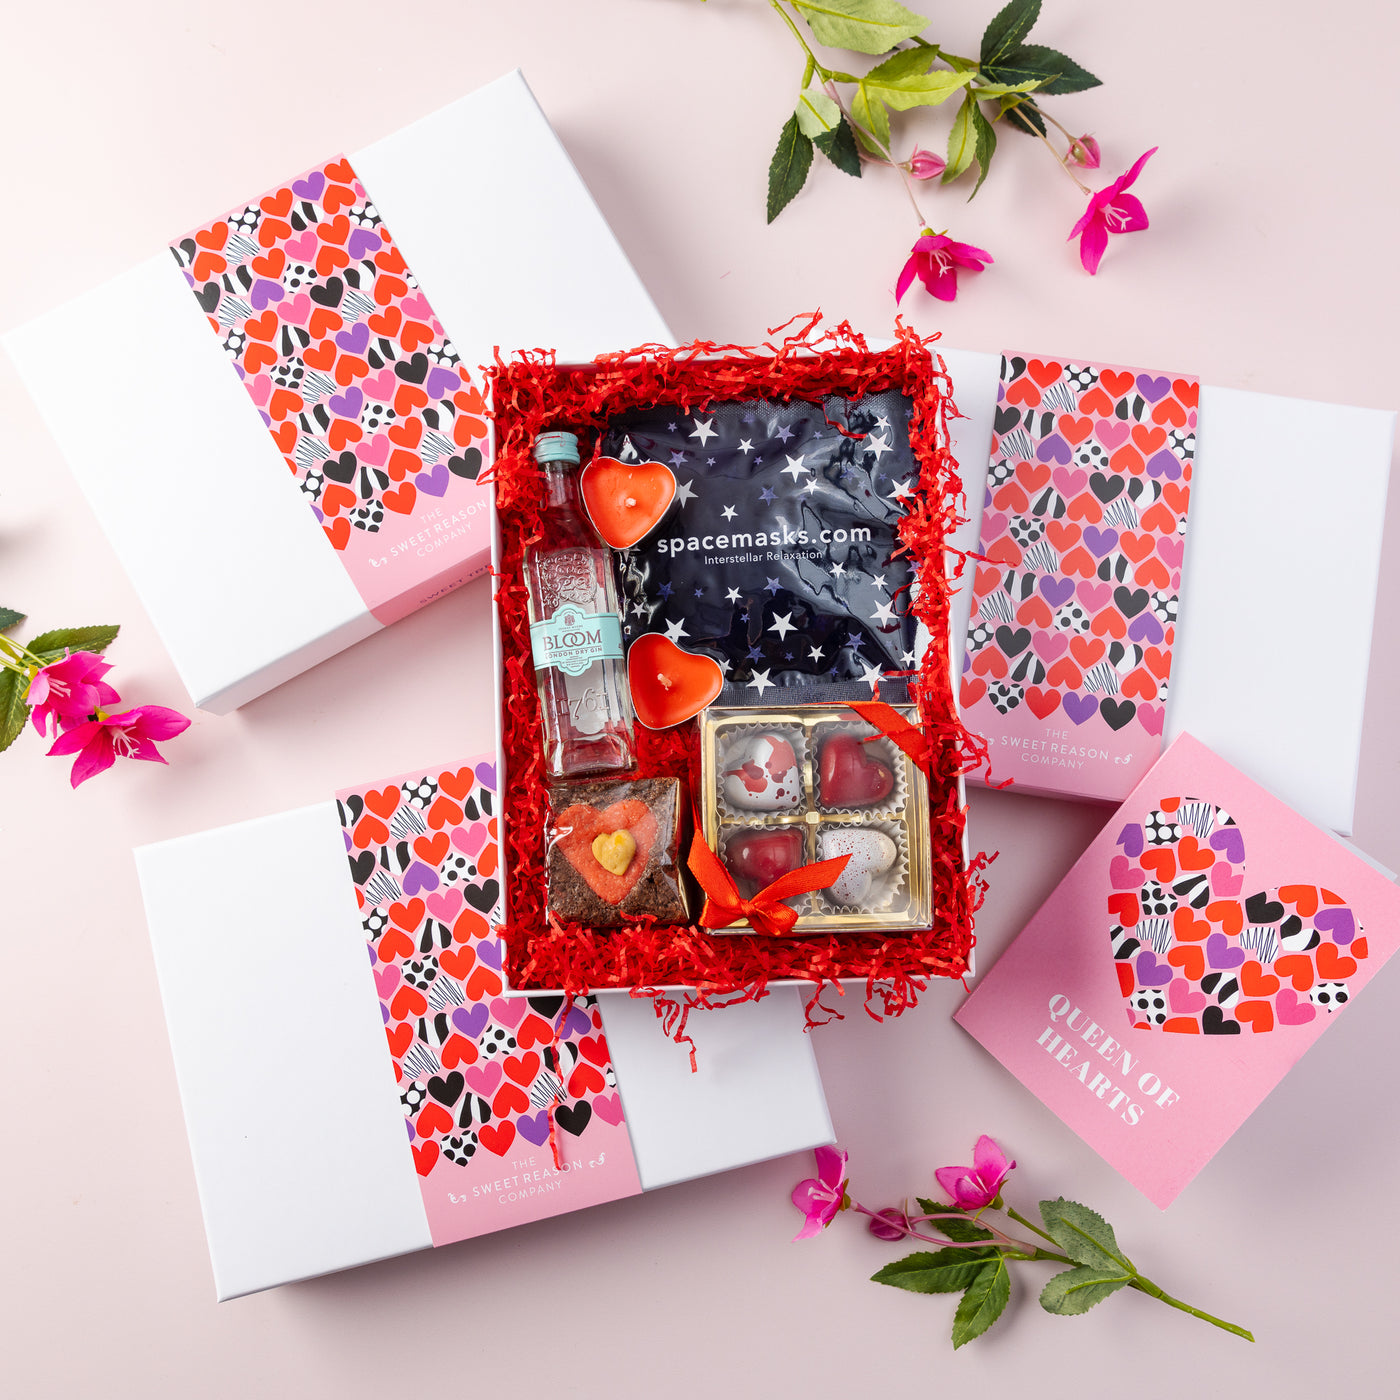 'Queen of Hearts' Relaxation and Gin Valentine's Day Hamper